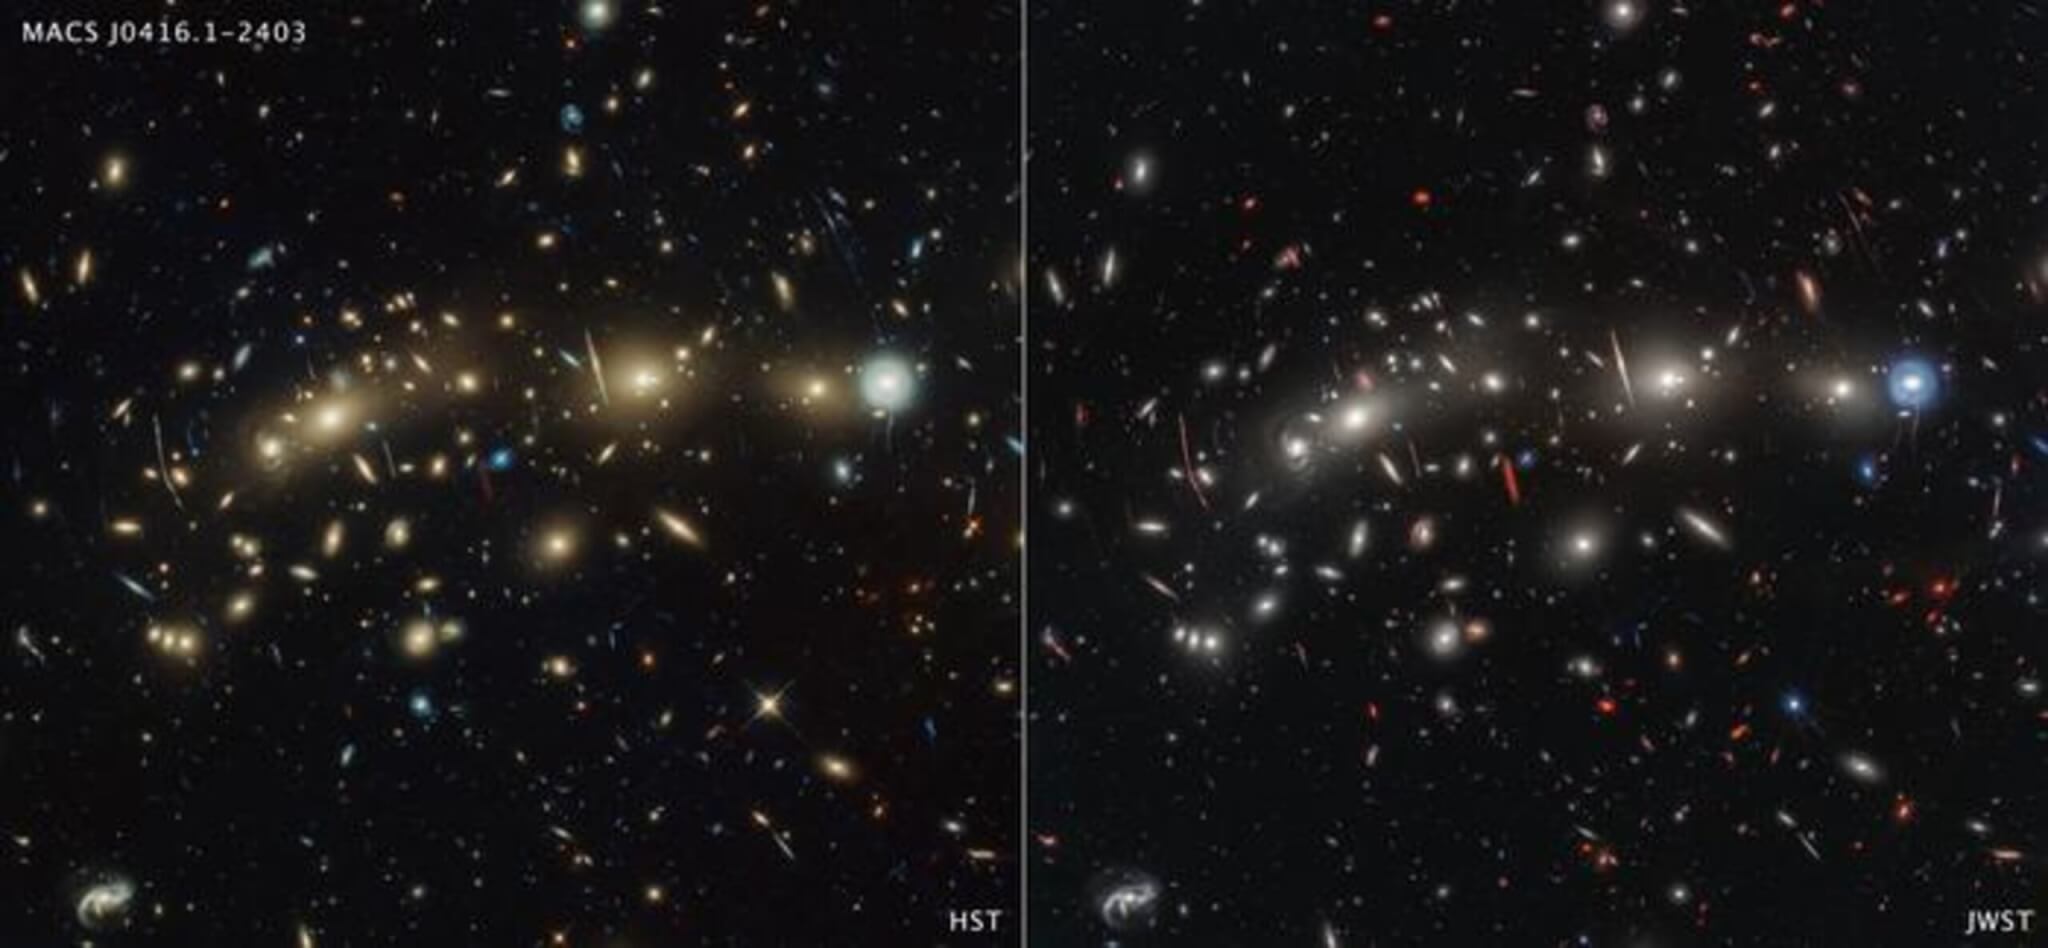 This side-by-side comparison of galaxy cluster MACS0416 as seen by the Hubble Space Telescope in optical light (left) and the James Webb Space Telescope in infrared light (right) reveals different details